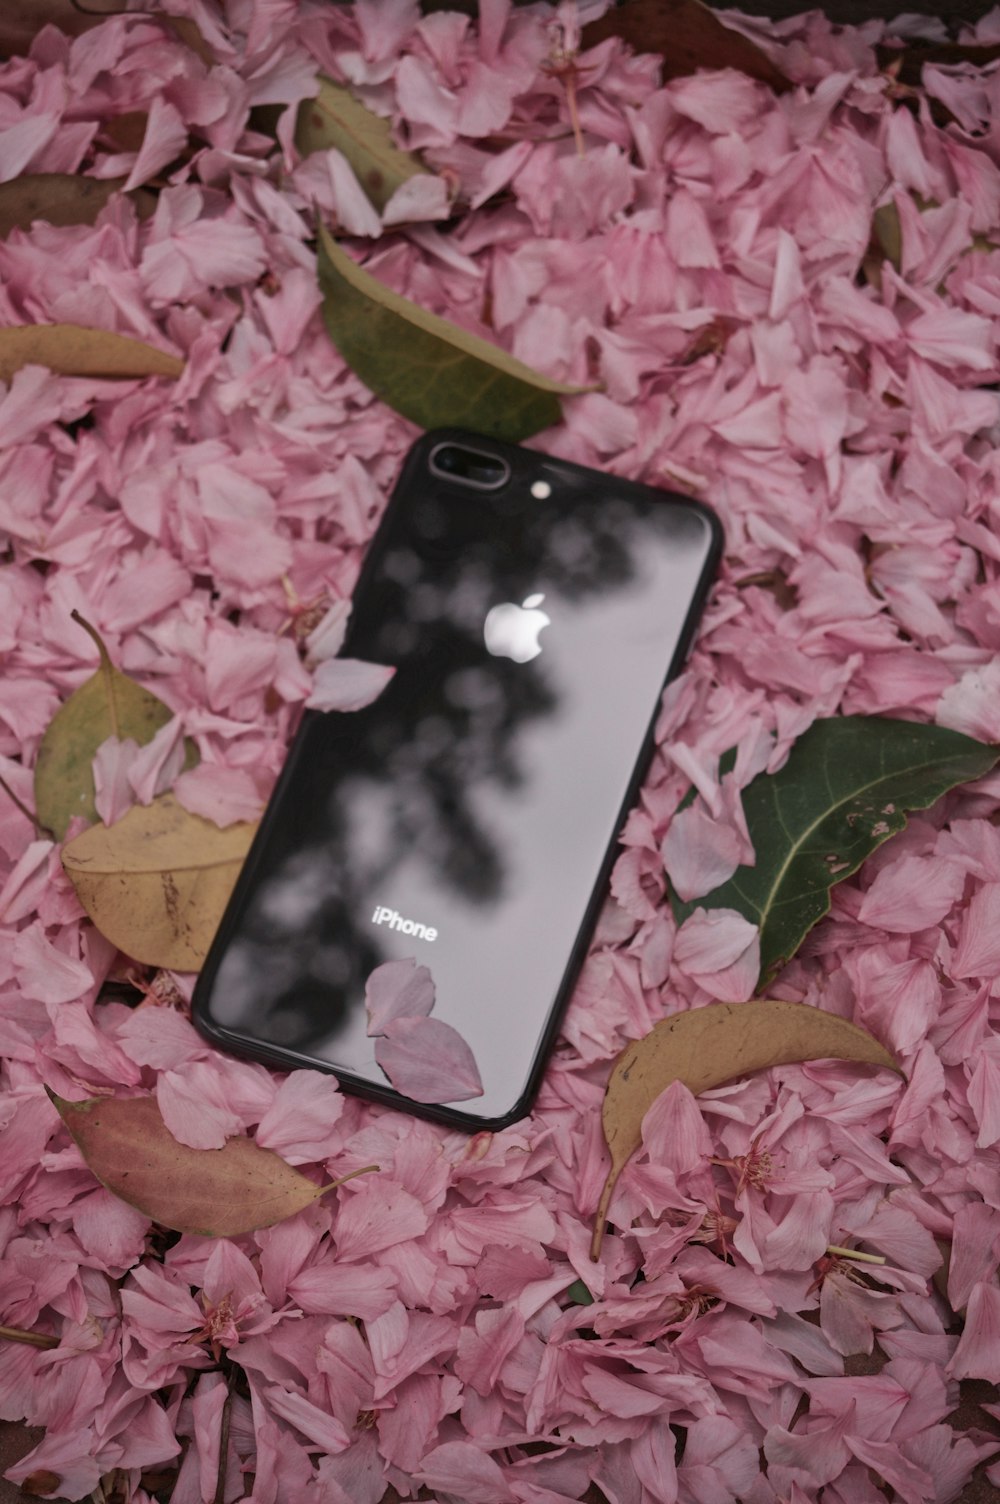 space gray iphone 6 on pink and green leaves